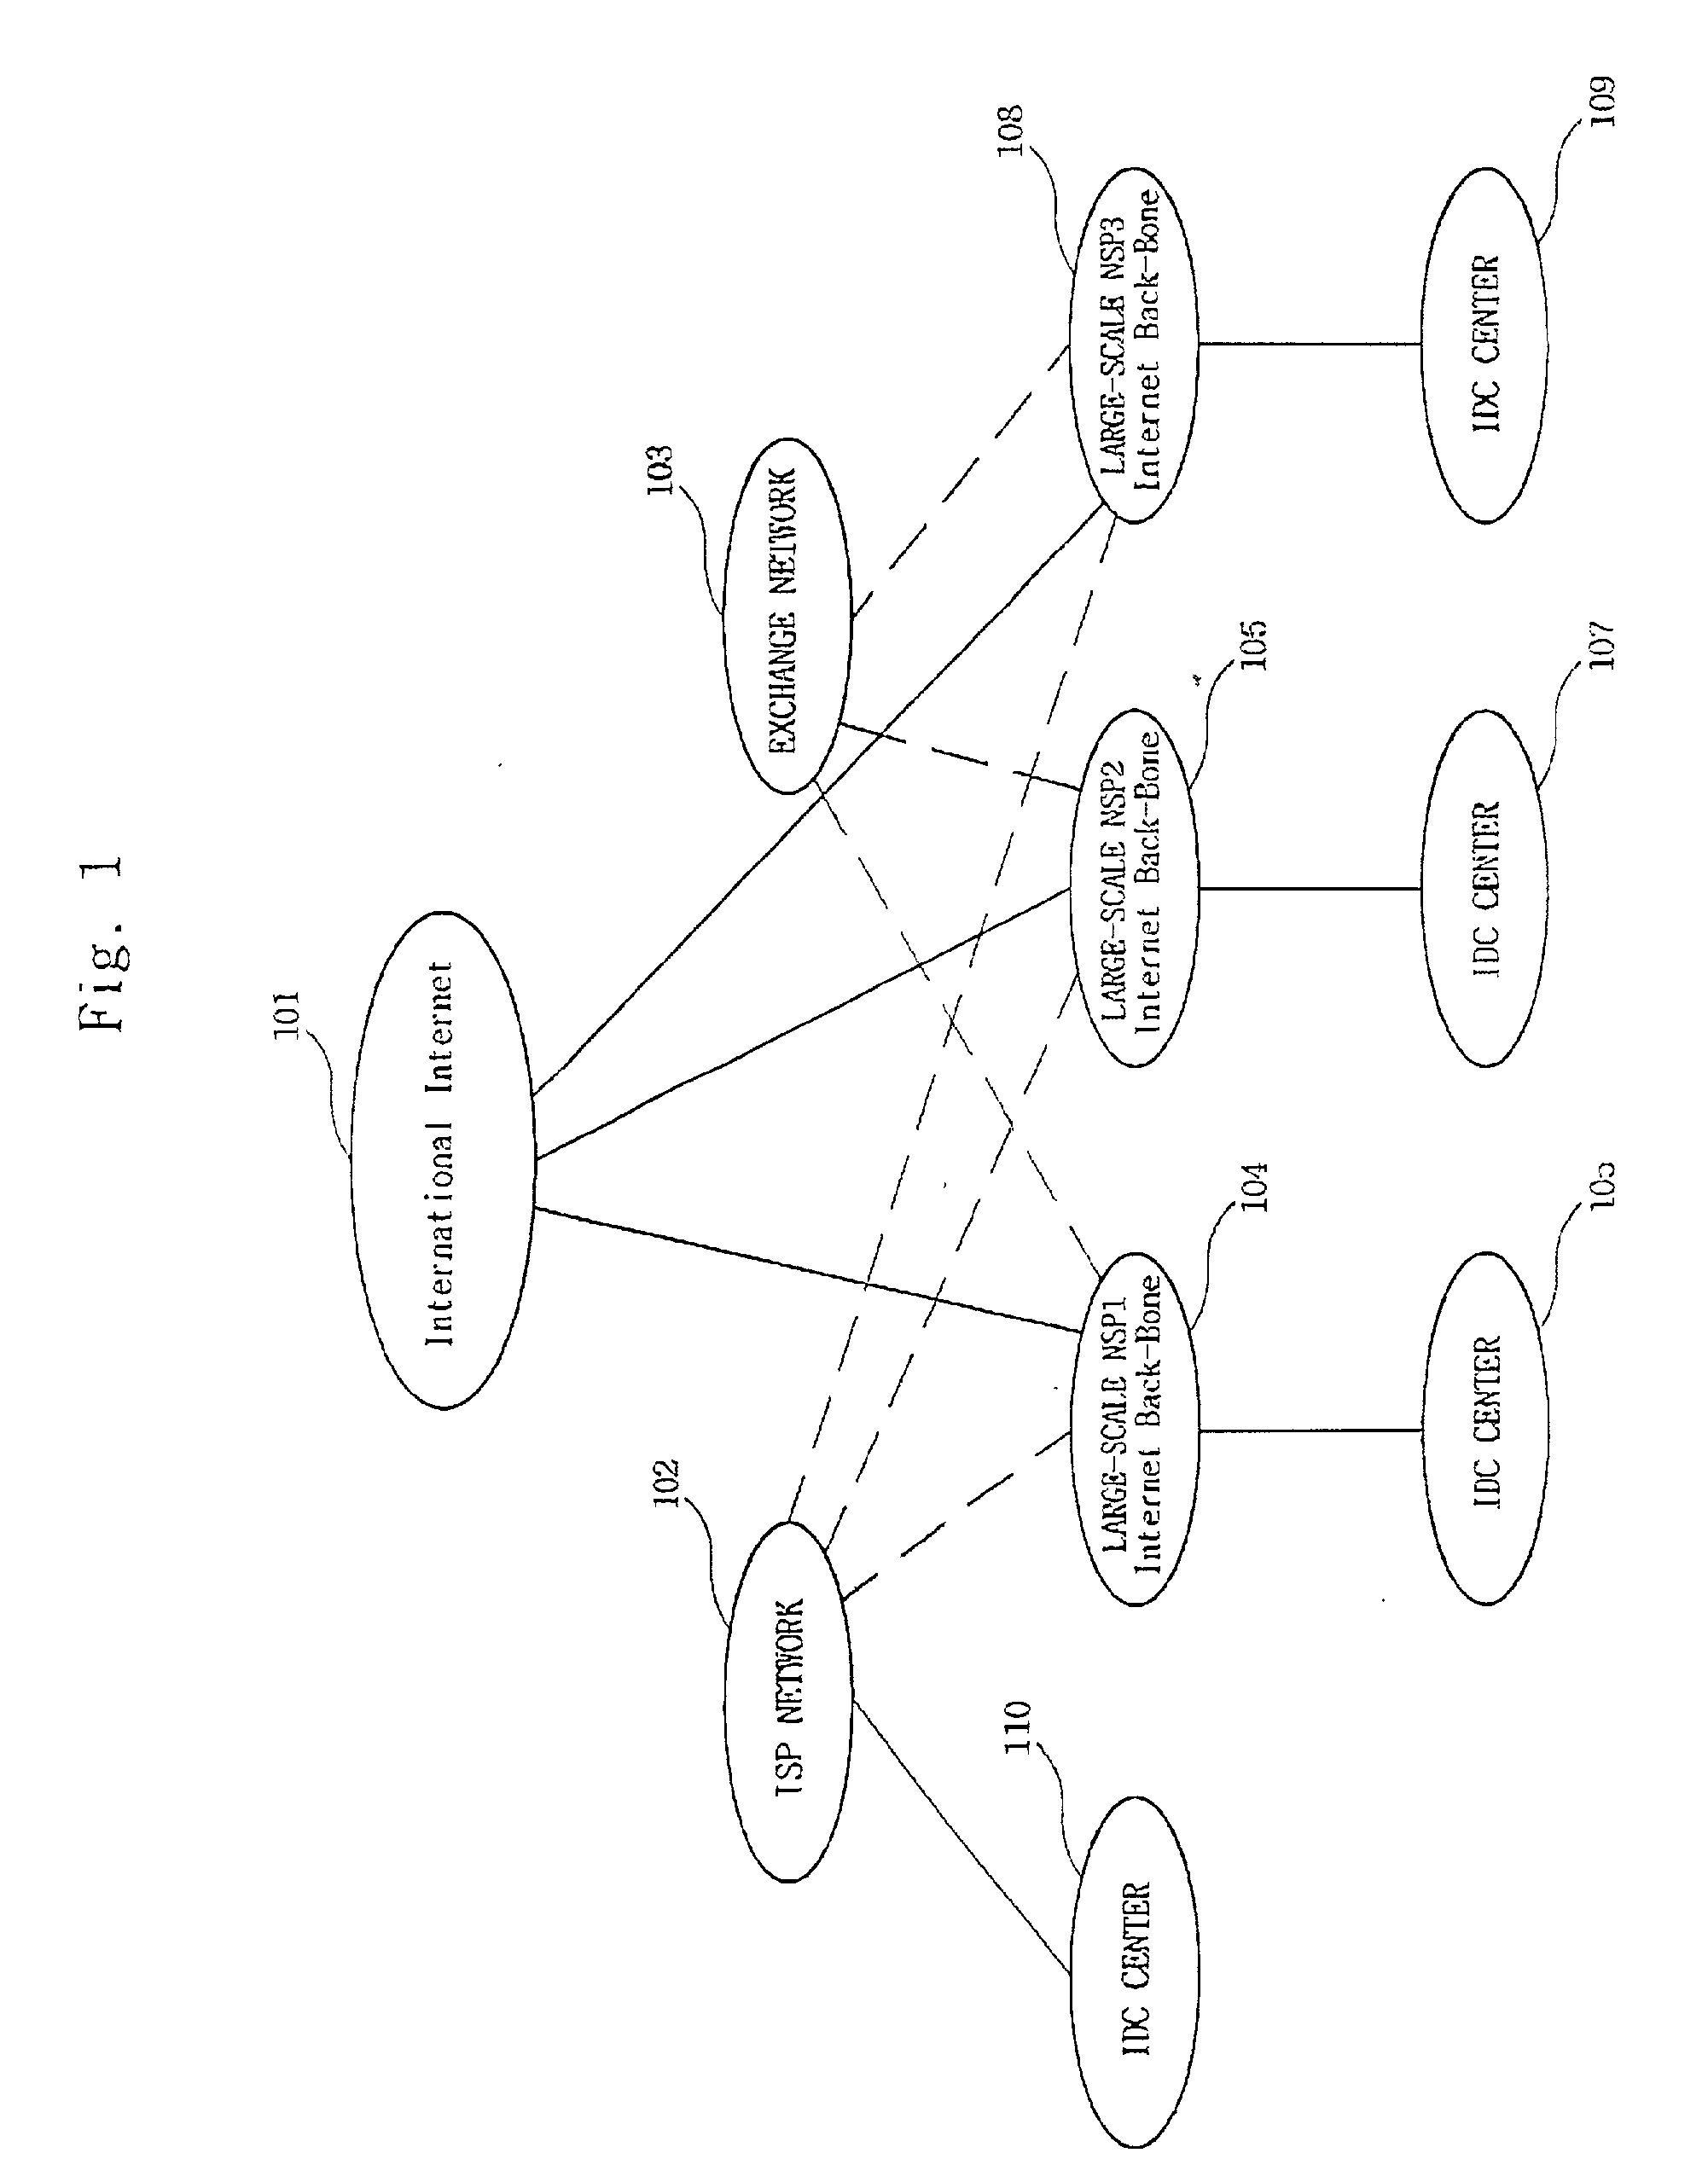 Dedicated private network service method having backup and loads-balancing functions